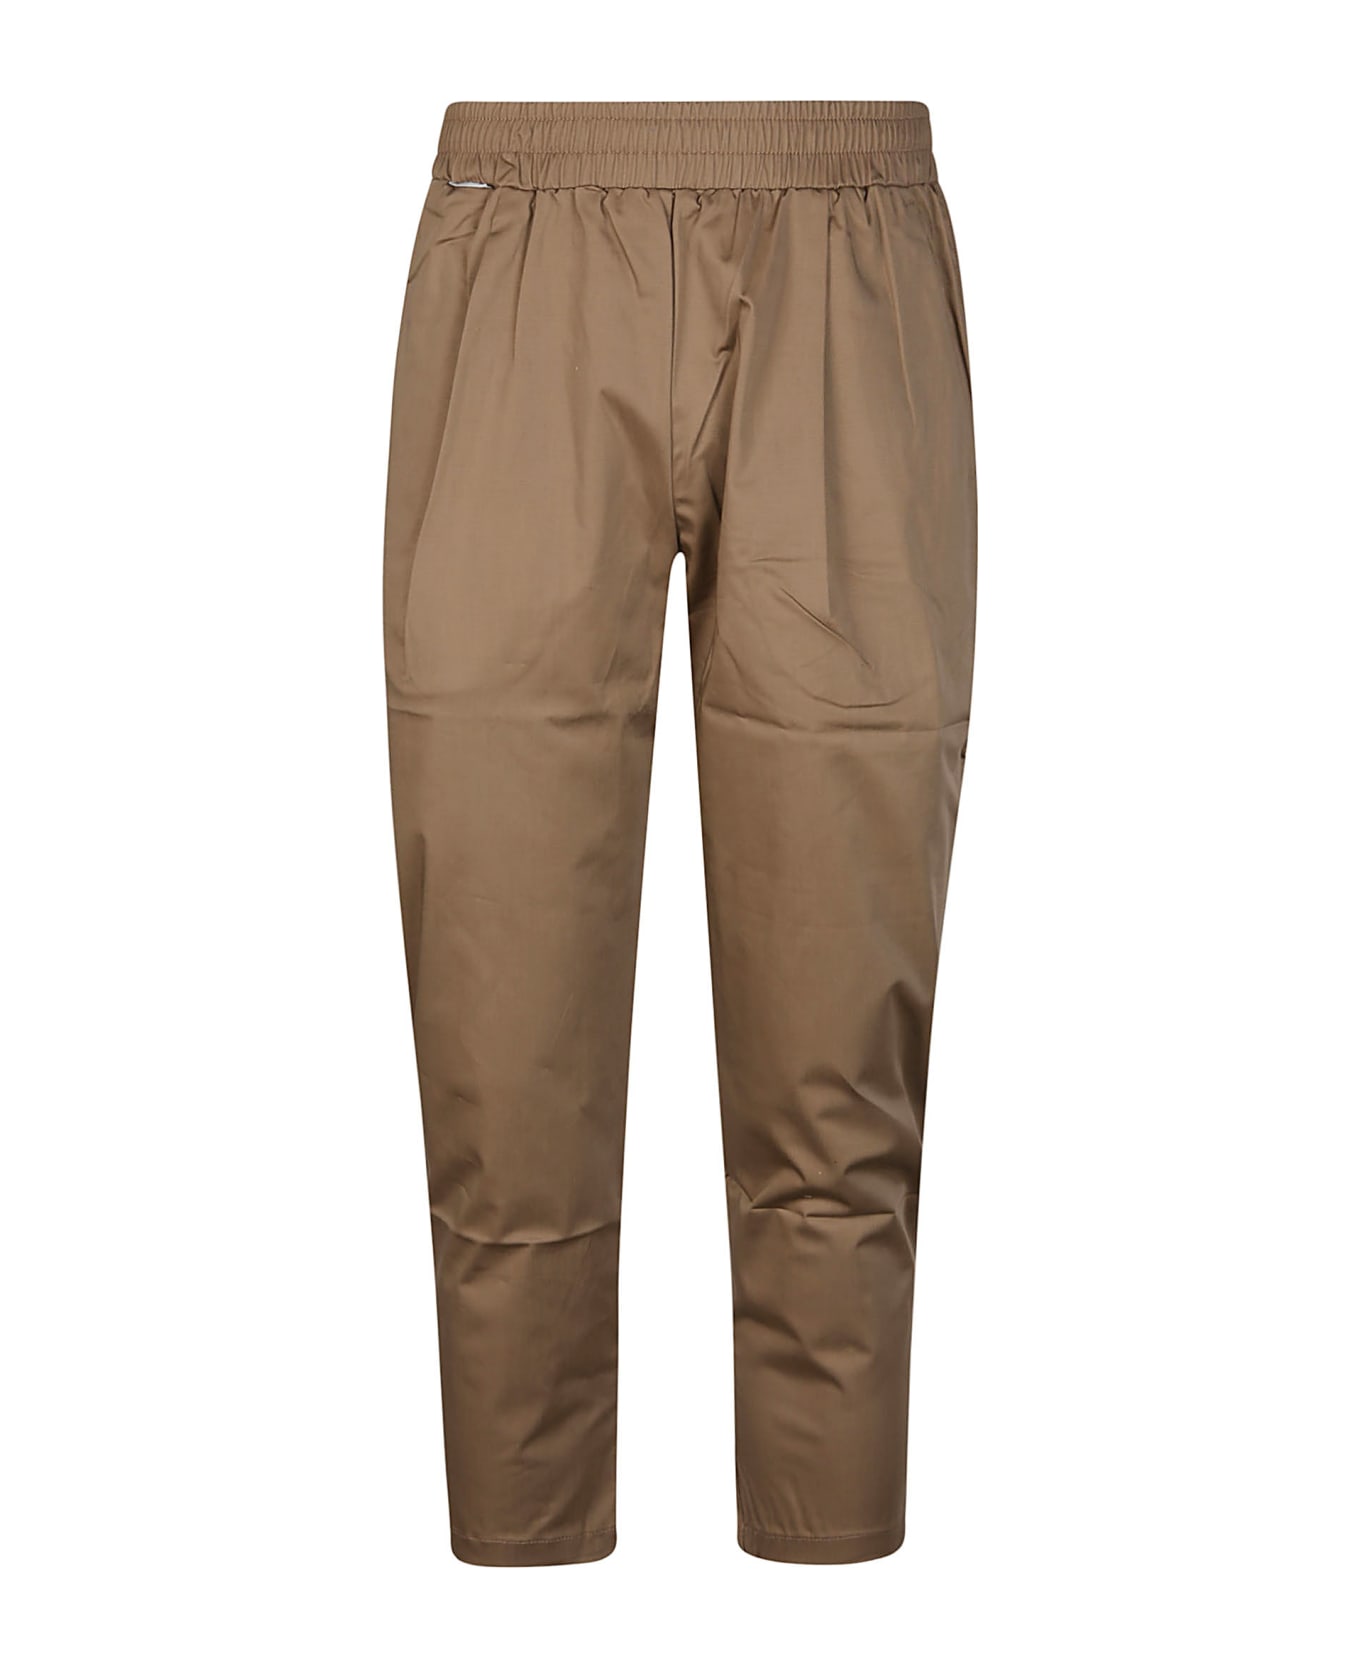 Family First Milano Chino Pant - Beige